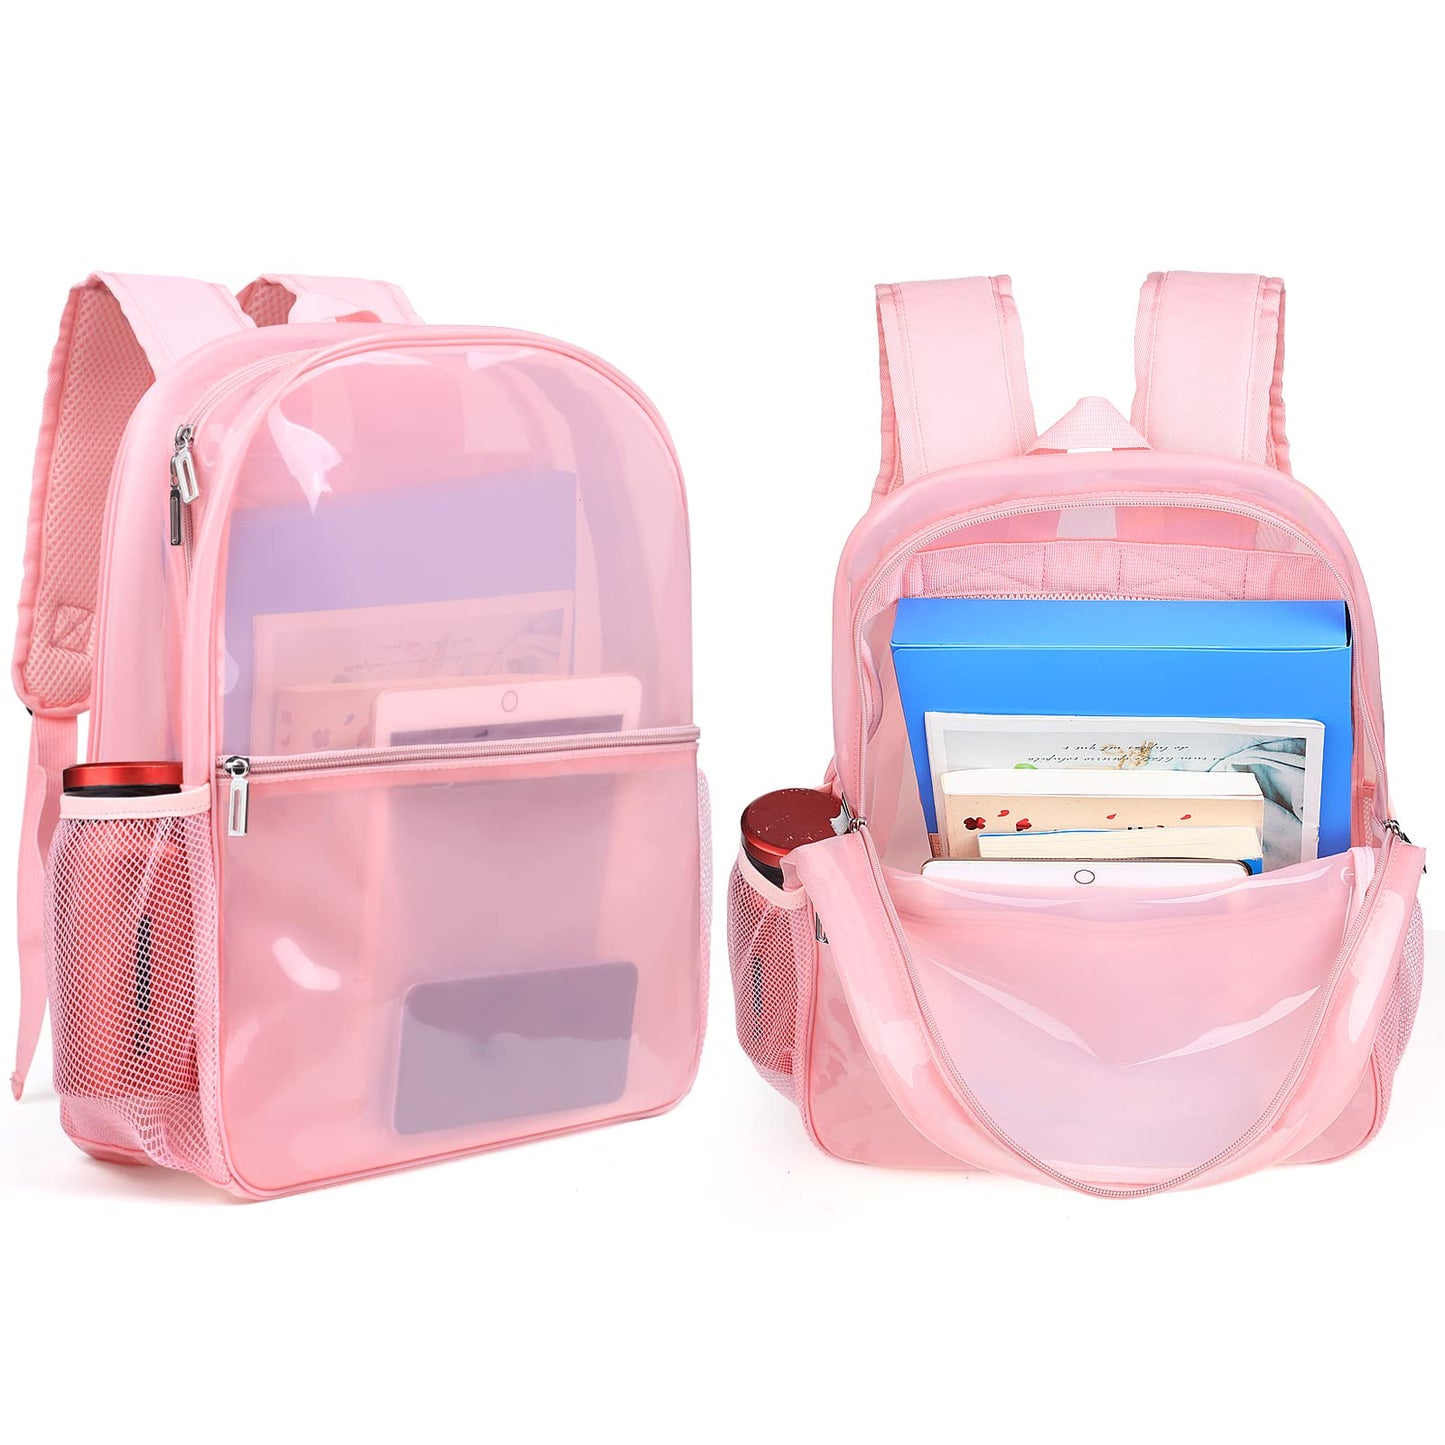 Neurora Clear Backpack Heavy Duty TPU Transparent Backpack for School,Sports,Work,Security Travel,College.